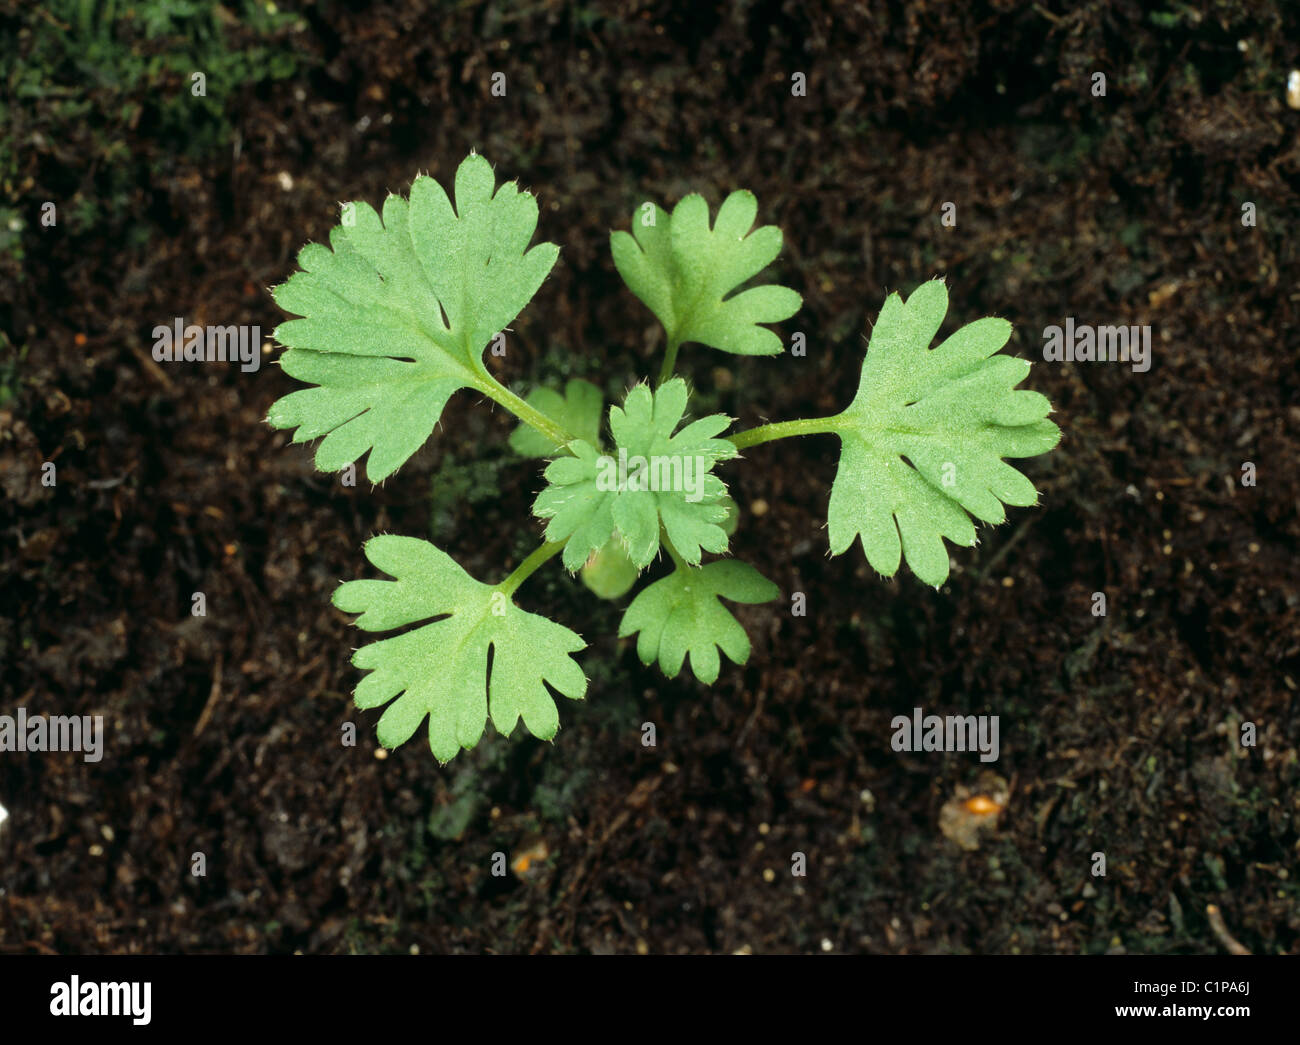 Parsley piert (Aphanes arvensis) young seedling plant Stock Photo